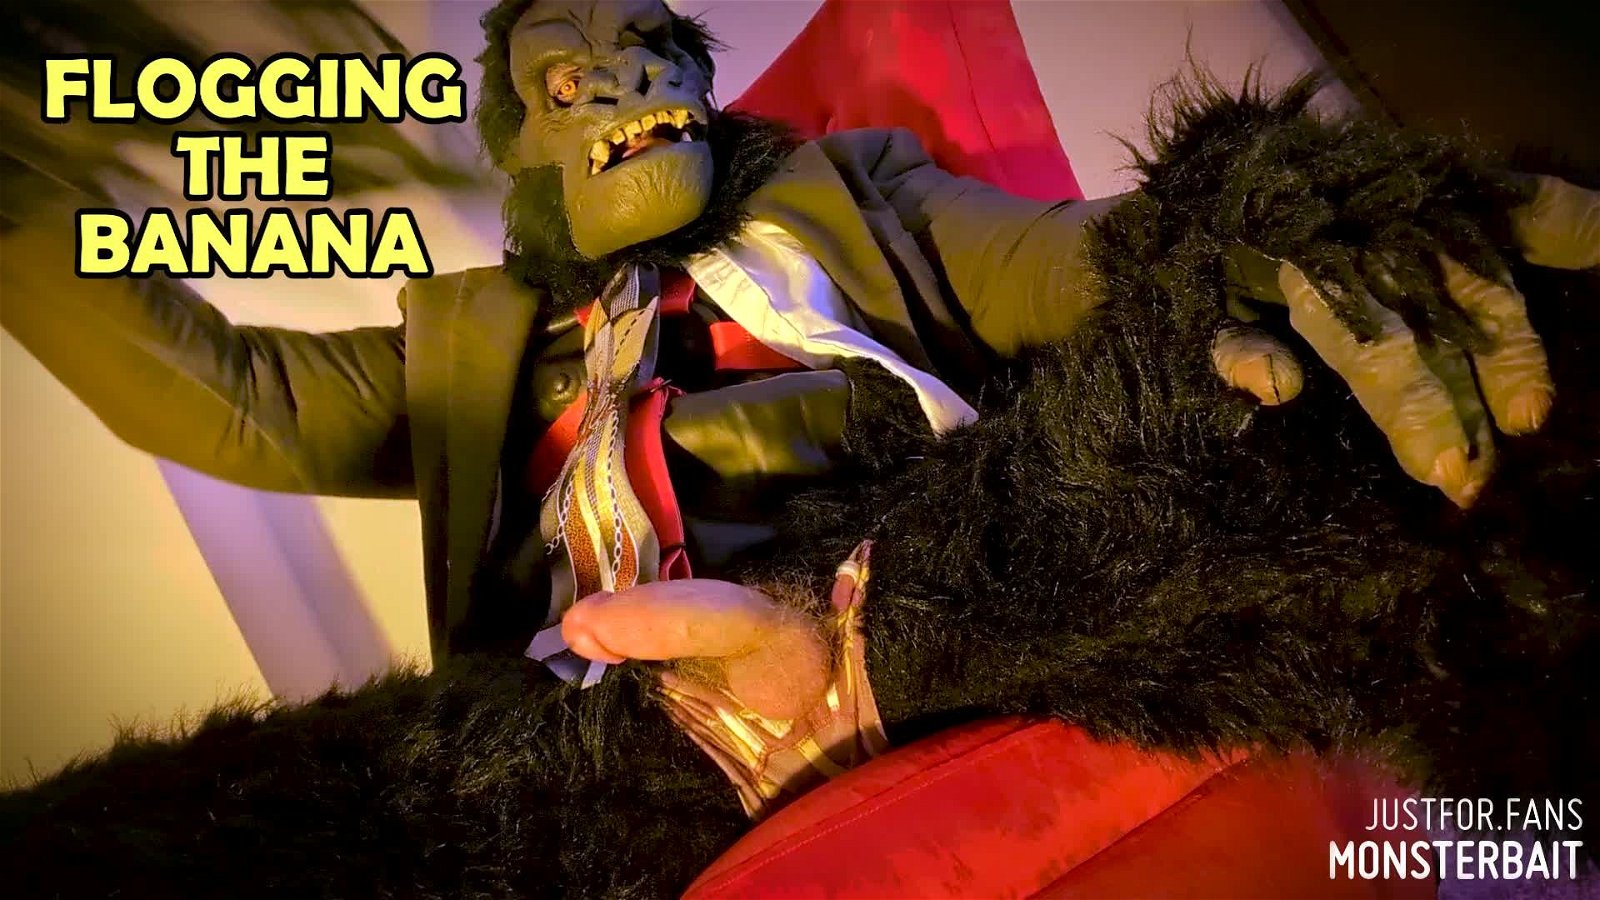 Video by Monsterbait with the username @Monsterbait, who is a star user,  May 2, 2024 at 4:50 PM. The post is about the topic GayExTumblr and the text says 'Gorilla spends some time giving his banana some attention. Some light CBT, edging, and sudden orgasm... bad monkey! 

Catch this and more masks and costume content on our fan pages!'